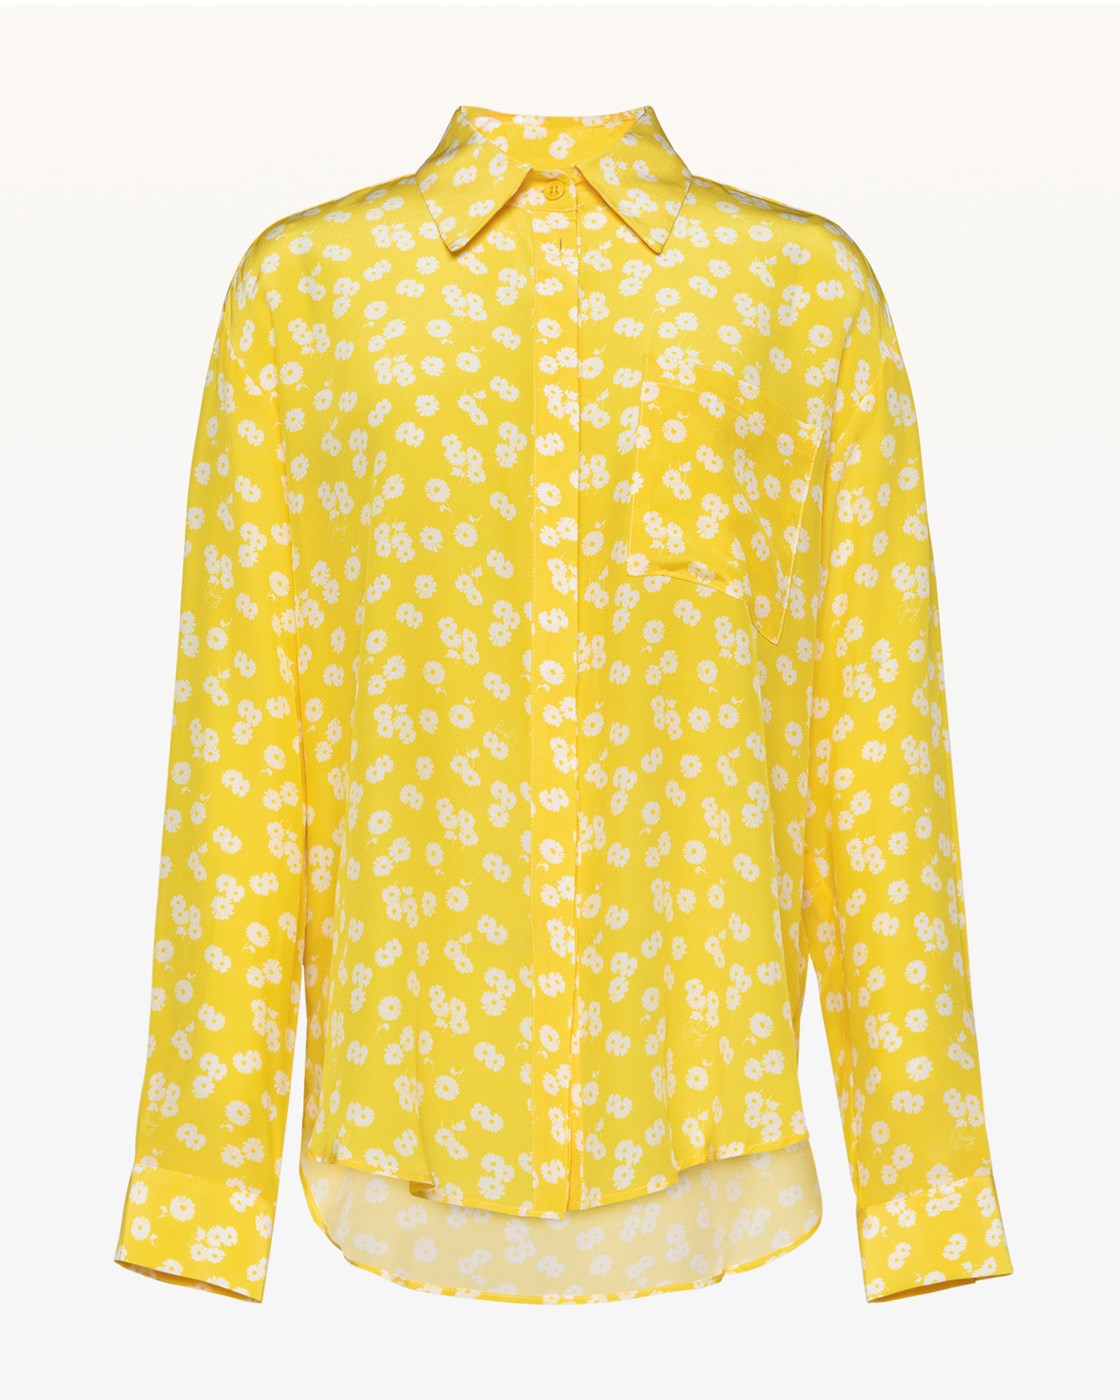 Juicy Couture Ditsy Daisy Silk Button Front Blouse